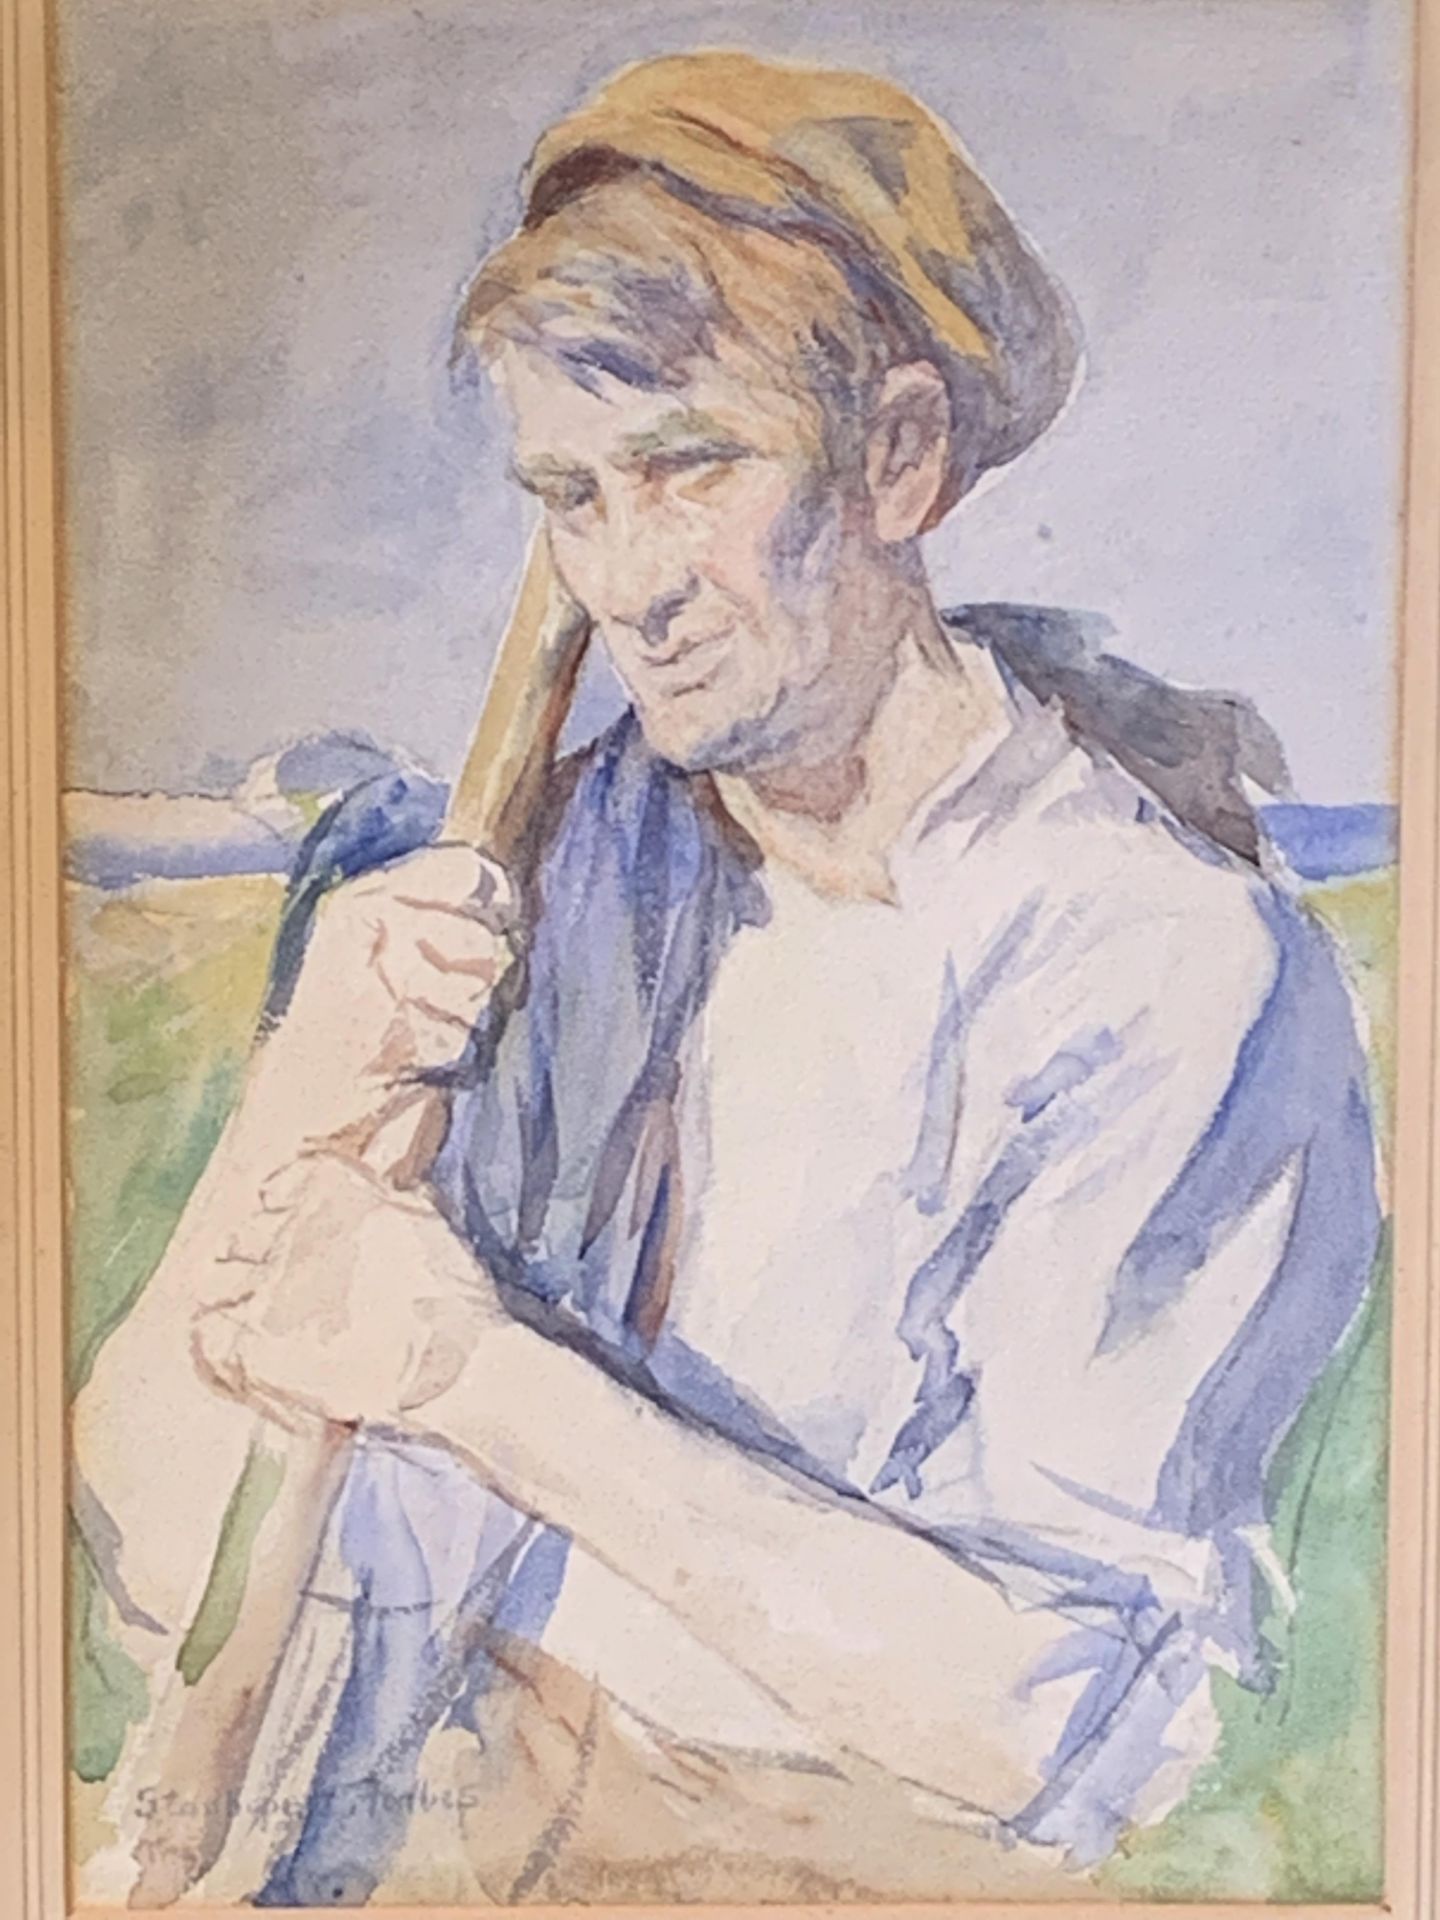 Stanhope Alexander Forbes (1857 - 1947), watercolour of a farmer - Image 3 of 6